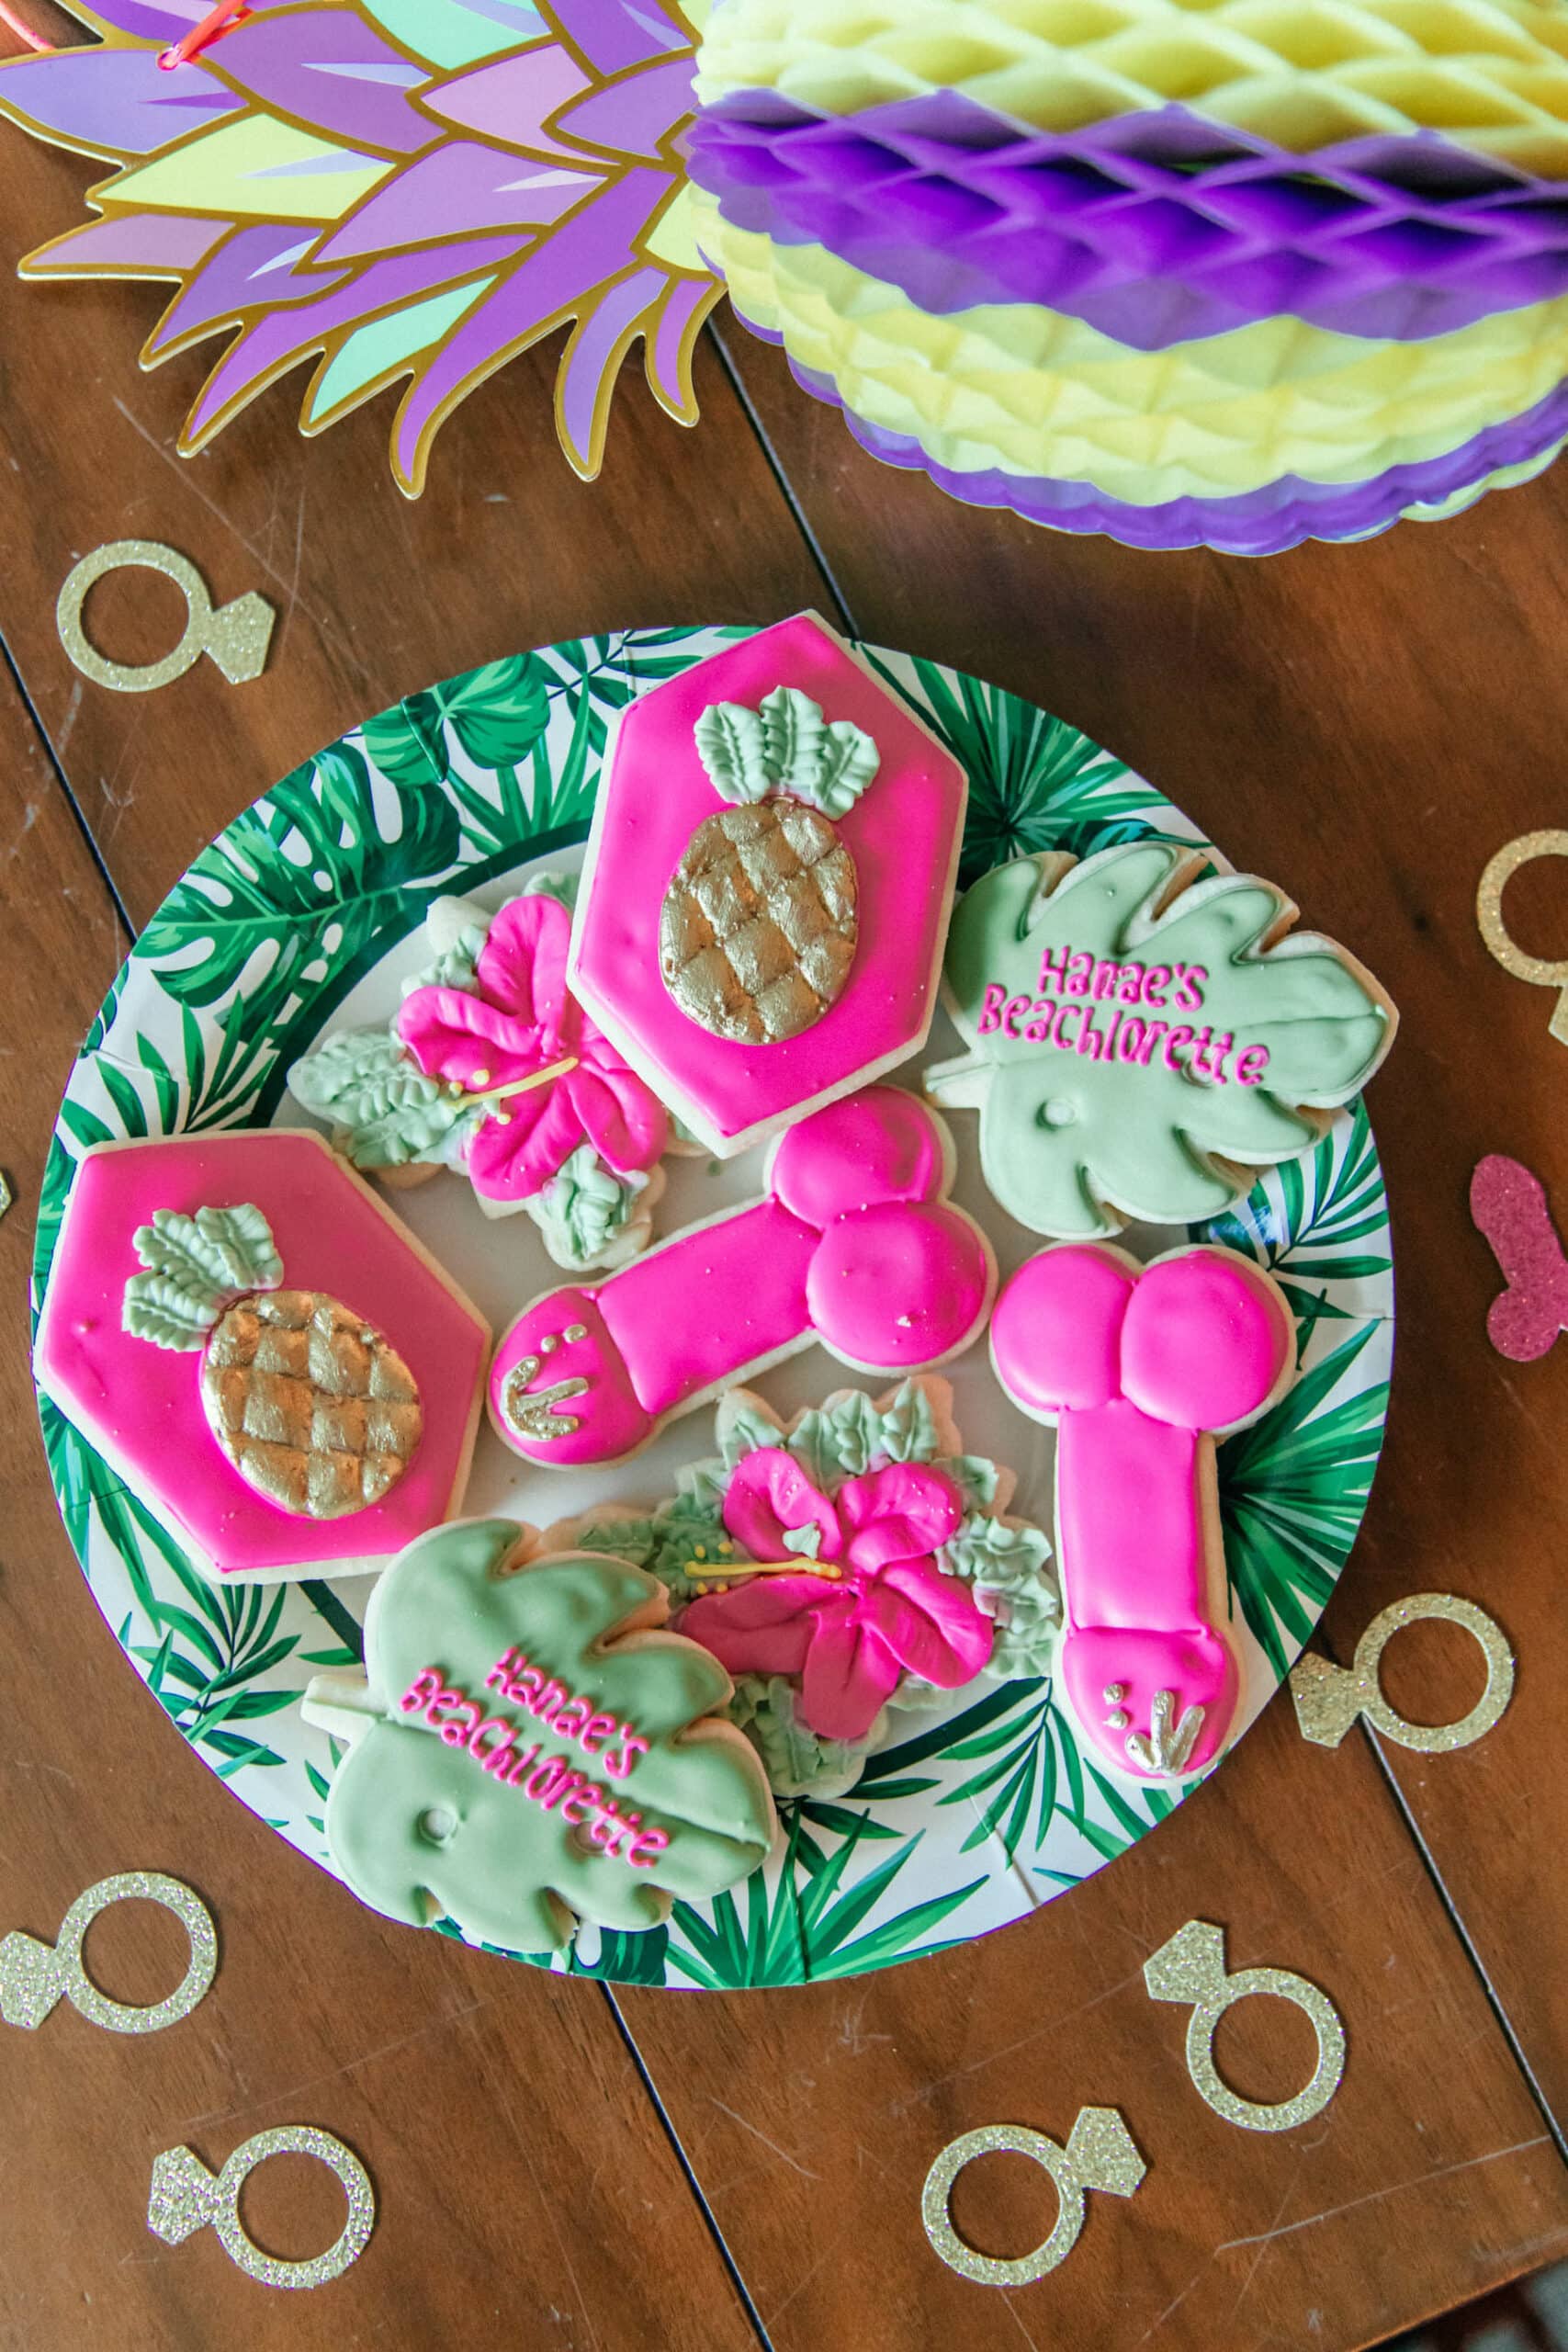 Tropical Bachelorette Party Ideas: Decor, Goody Bags, Games, and More!